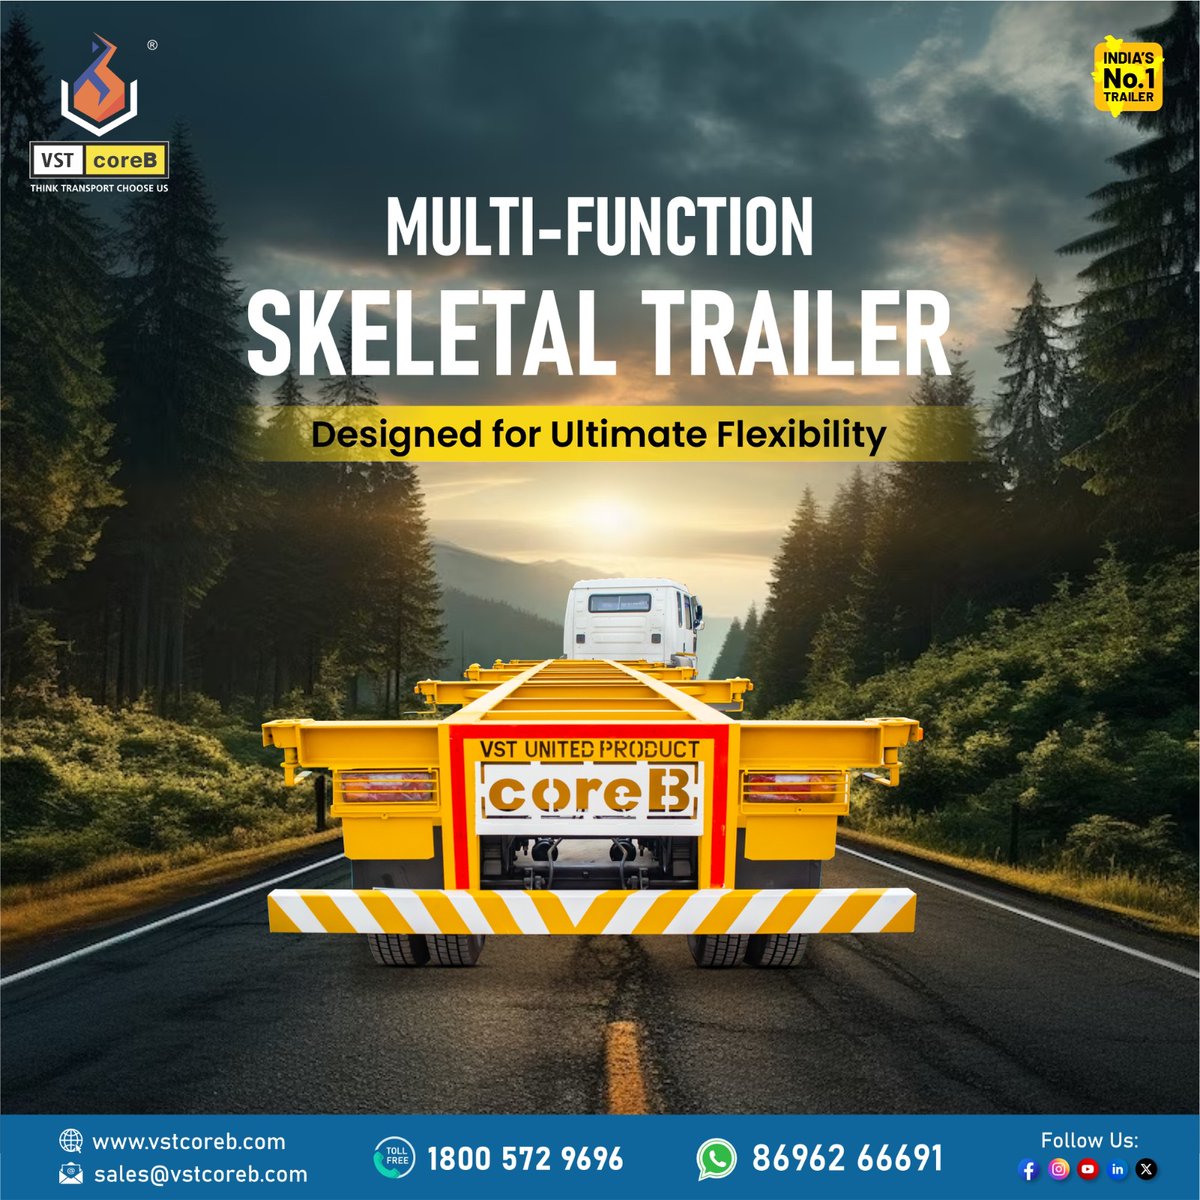 Discover versatility with our multi-functional skeletal trailers, offering flexibility in load handling. Elevate your logistics with us!
.
#skeletaltrailer #skeletaltrailers #vstcoreb #trailers #trailermanufacturer #tiptrailer #tippingtrailer #flatbedtrailer #skeletaltrailer